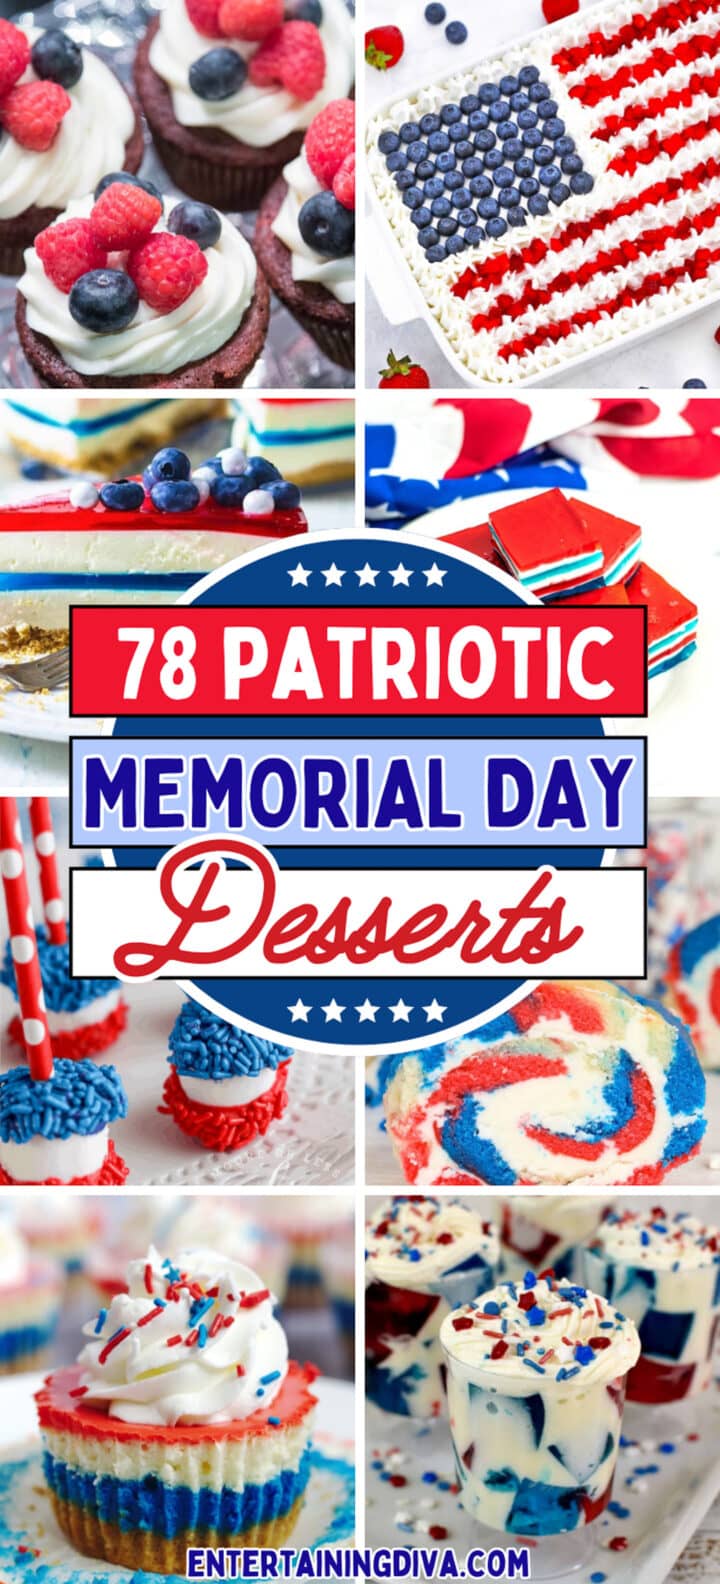 79 Patriotic Red, White and Blue Desserts For The 4th of July